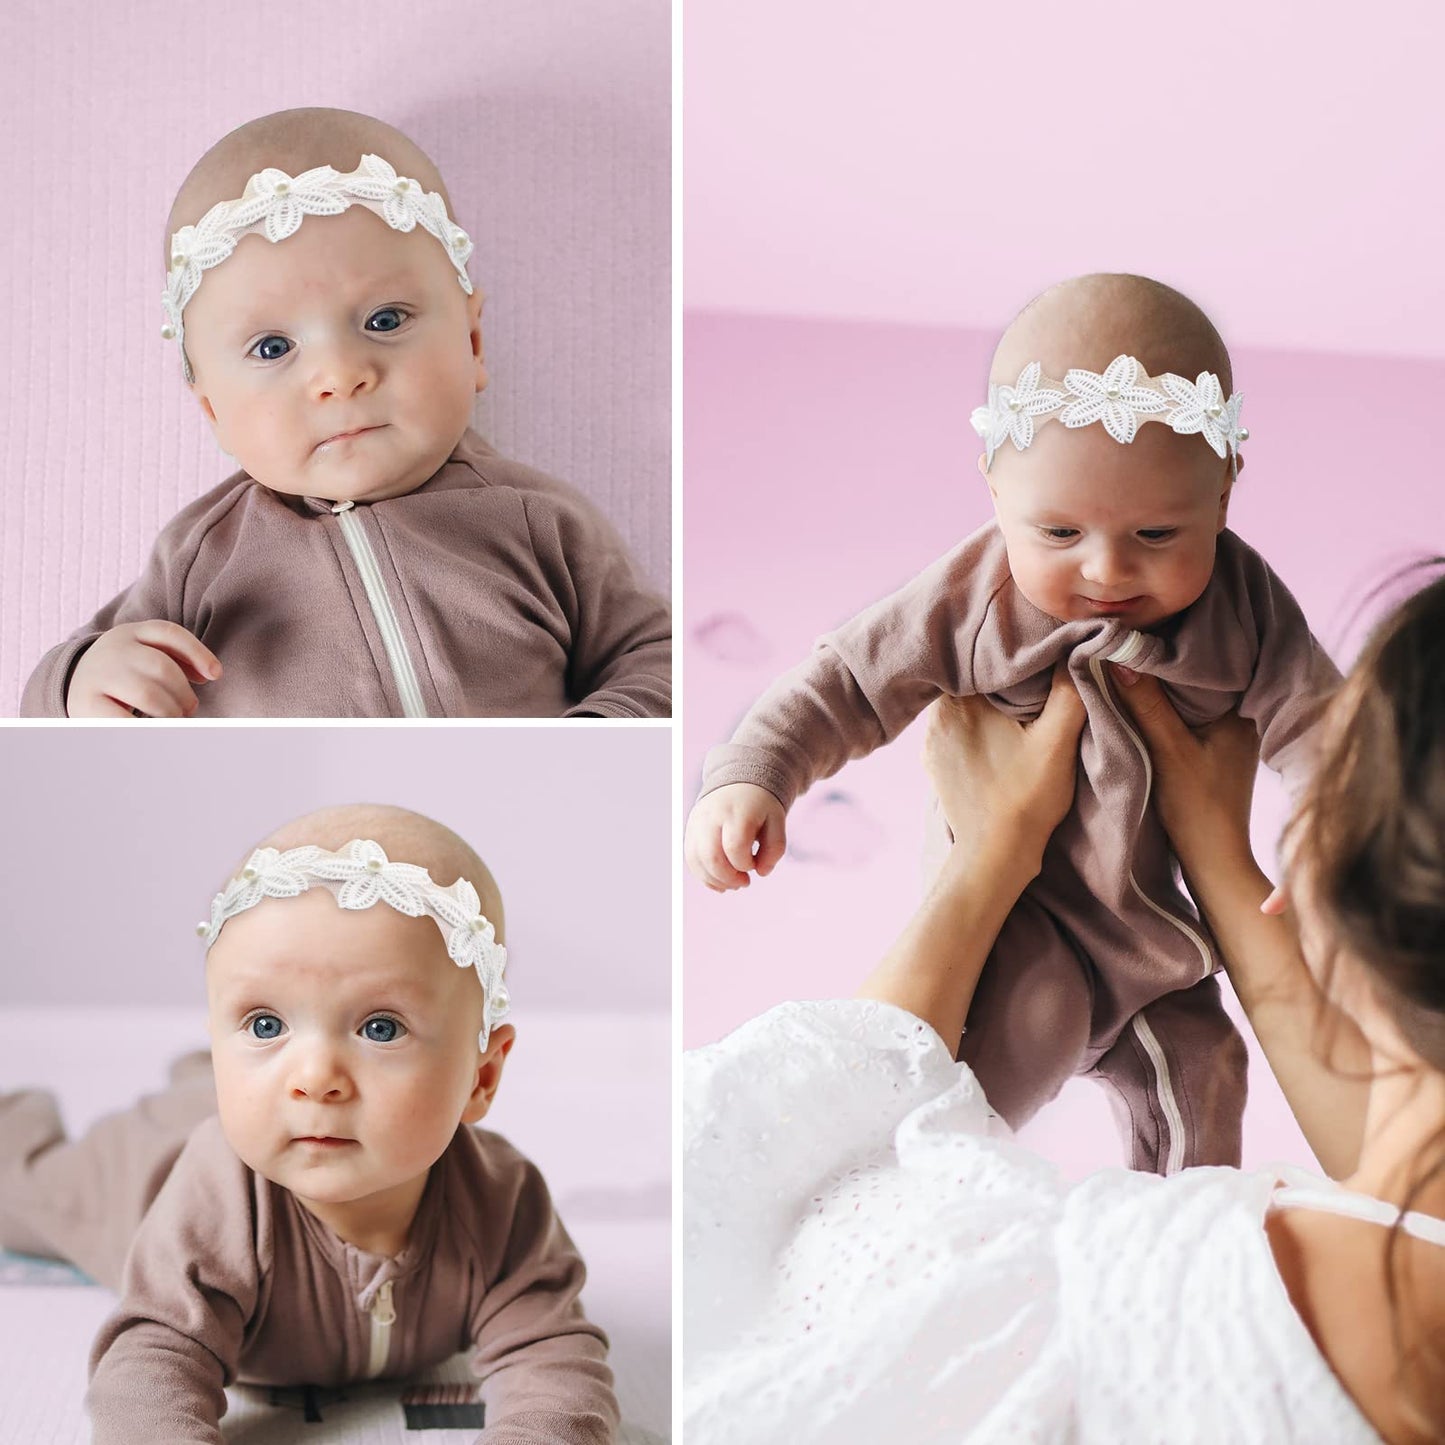 4 Pcs Baby Headbands, Baby Flower Headband, White Baby Girl Headbands, Lace Pearl Ribbon Toddler Headbands, Soft Flower Hair Accessories, Elastic Baby Bows, Headbands for Babies (White)